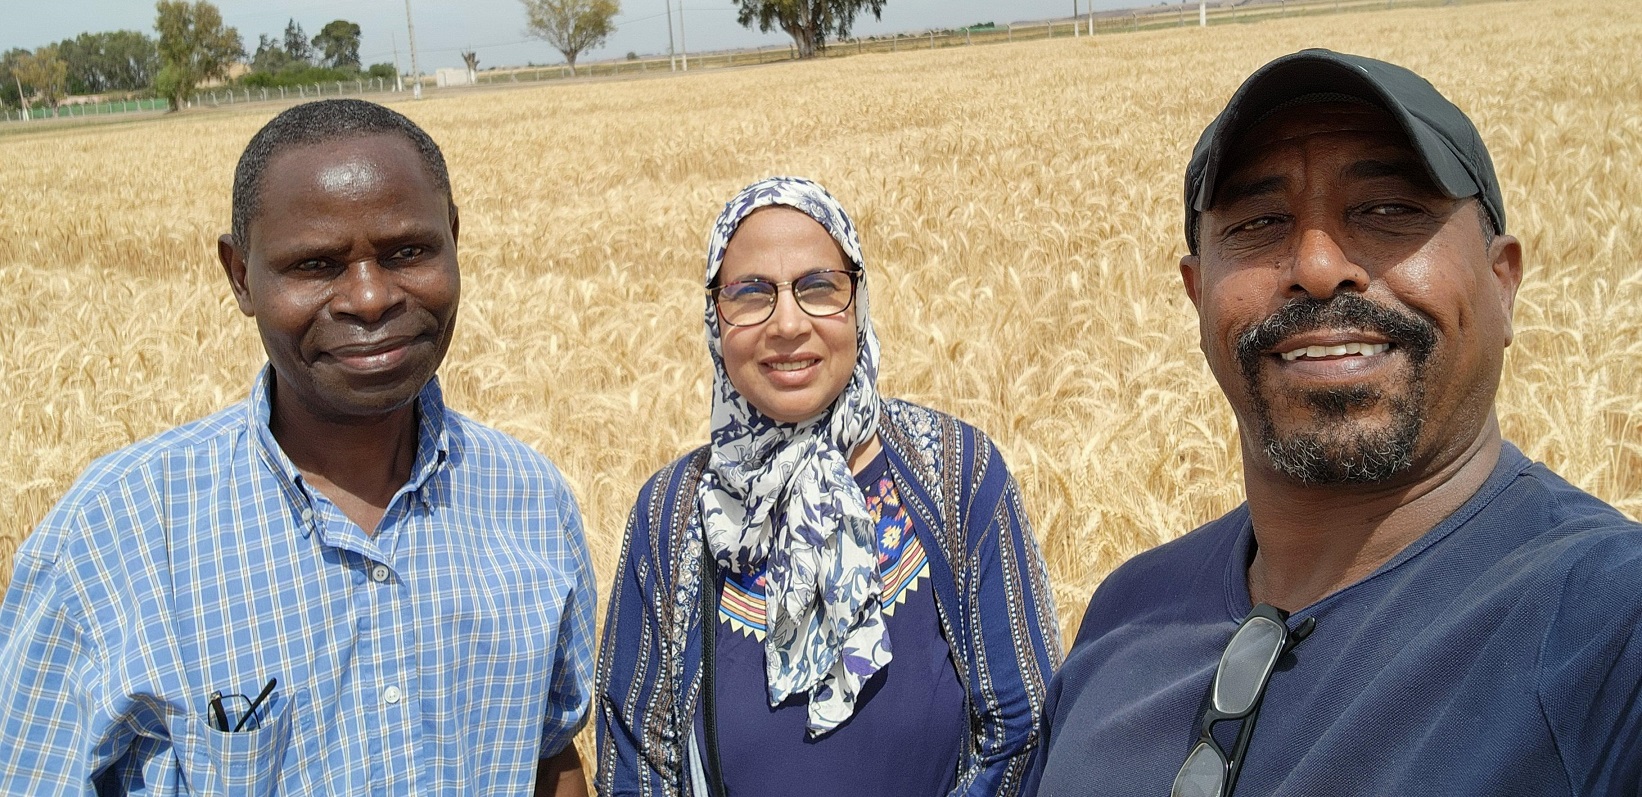 Stephen Wegulo (left) and Fatiha Bentata (center) visit wheat research plots at Rabat Regional Center for Agricultural Research in Marchouch commune, Morocco overseen by wheat breeder Wuletaw Tadesse (right)